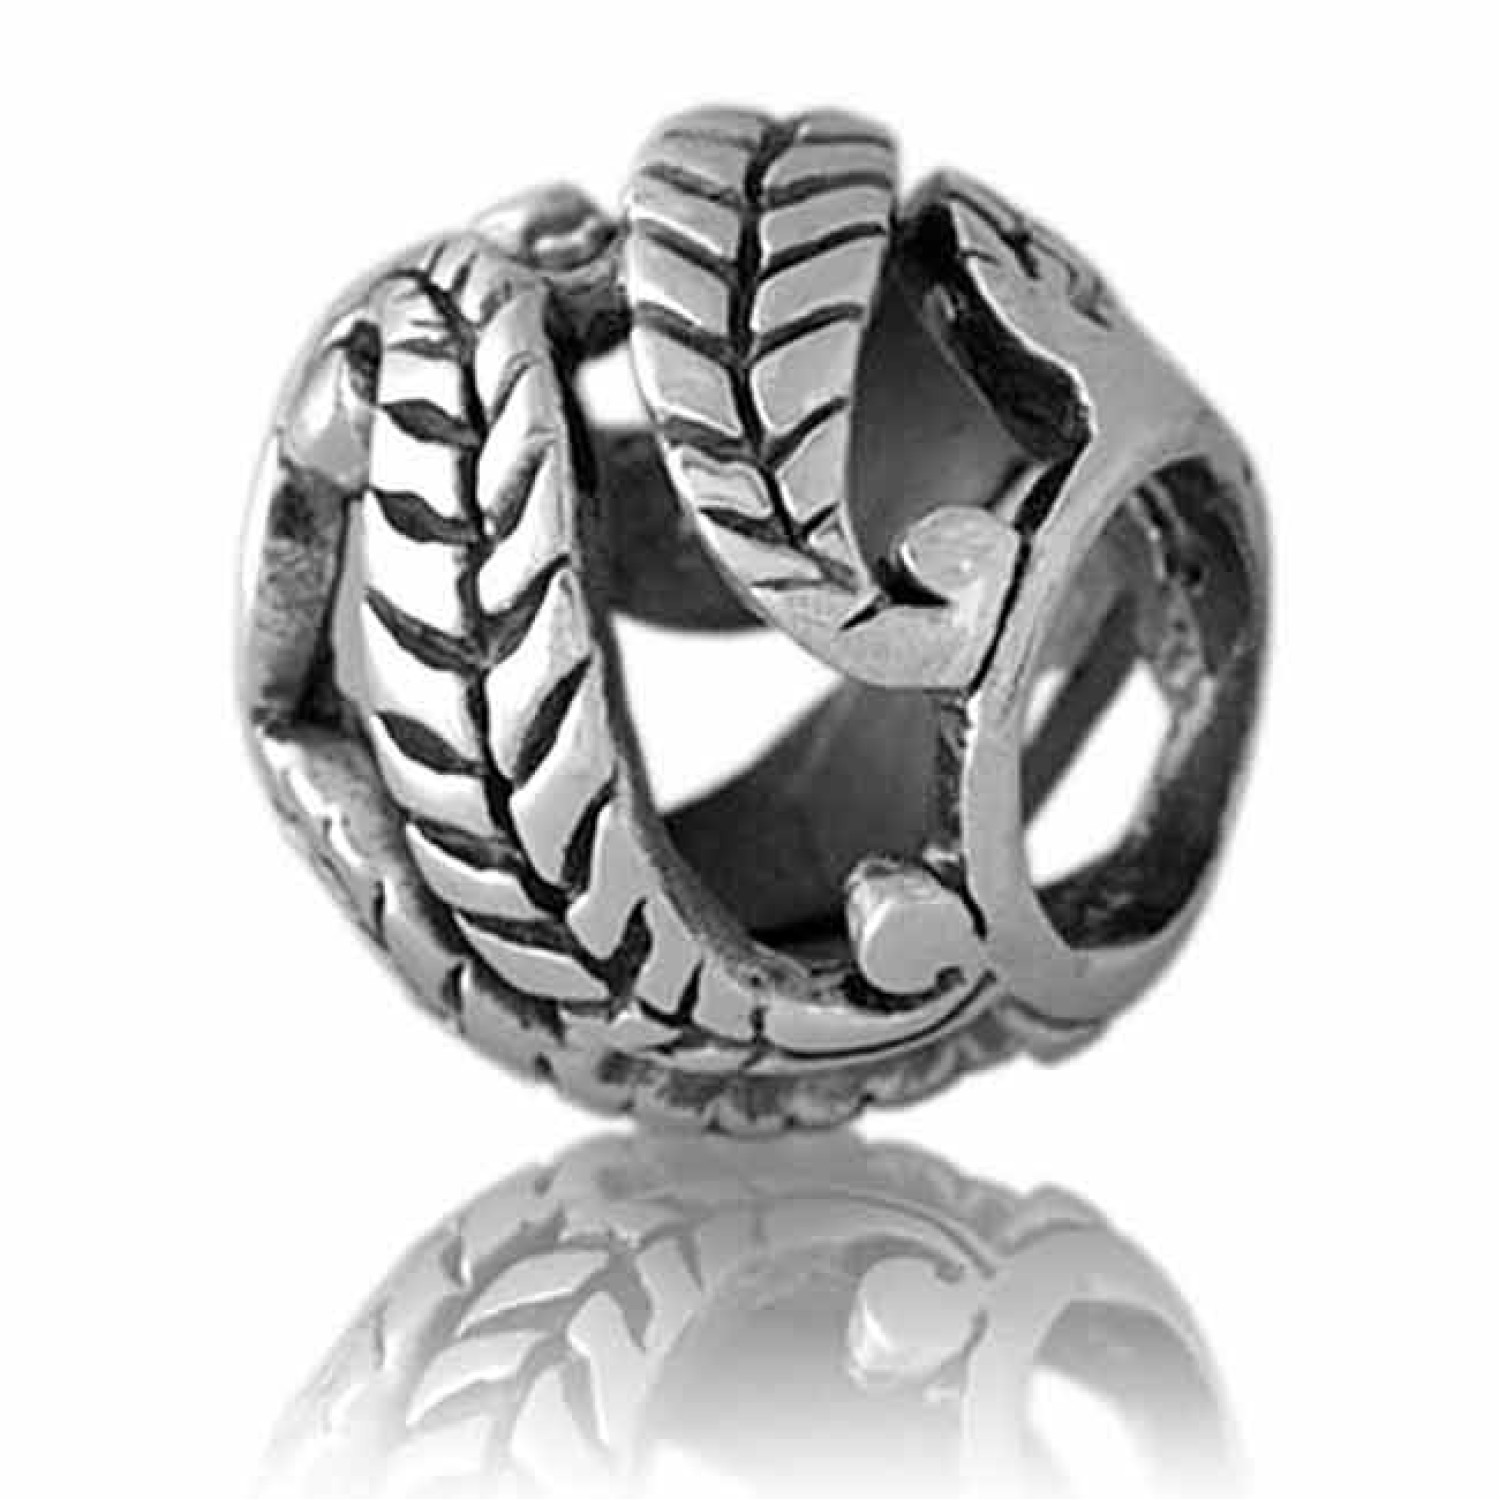 LK087 Evolve Charms Forever. Evolve New Zealand Forever Charm A series of fern fronds embraced in a continuous spiral of new beginnings and growth representing the cycle of life within which there are many friends, family and relationships that we t @chri